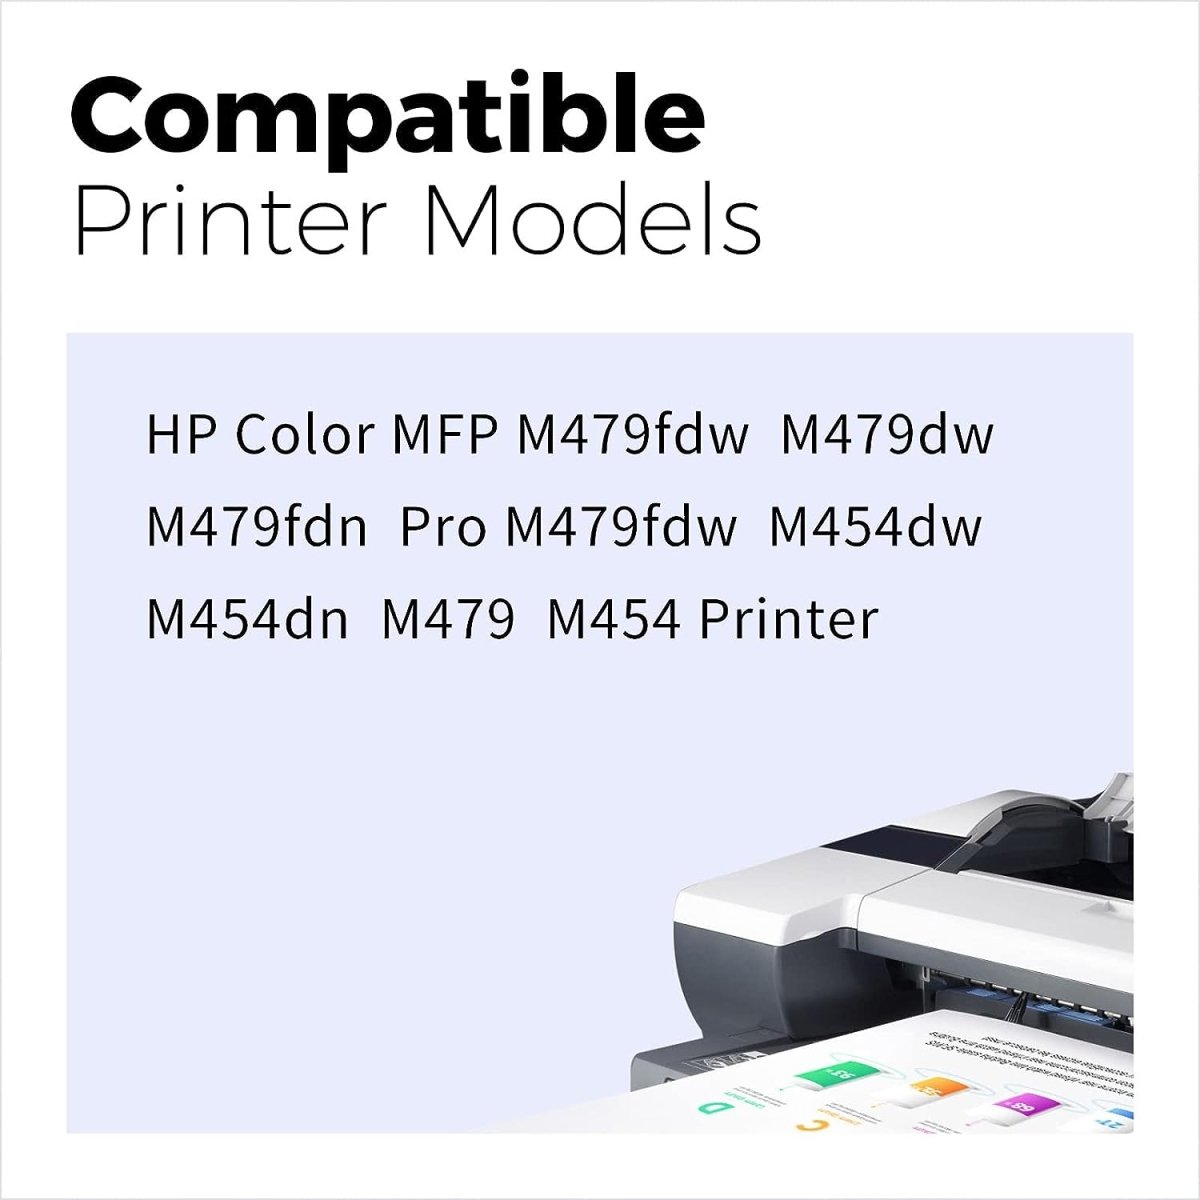 Compatible HP 414A Toner Cartridge (with chip) W2020A Black - Linford Office:Printer Ink & Toner Cartridge